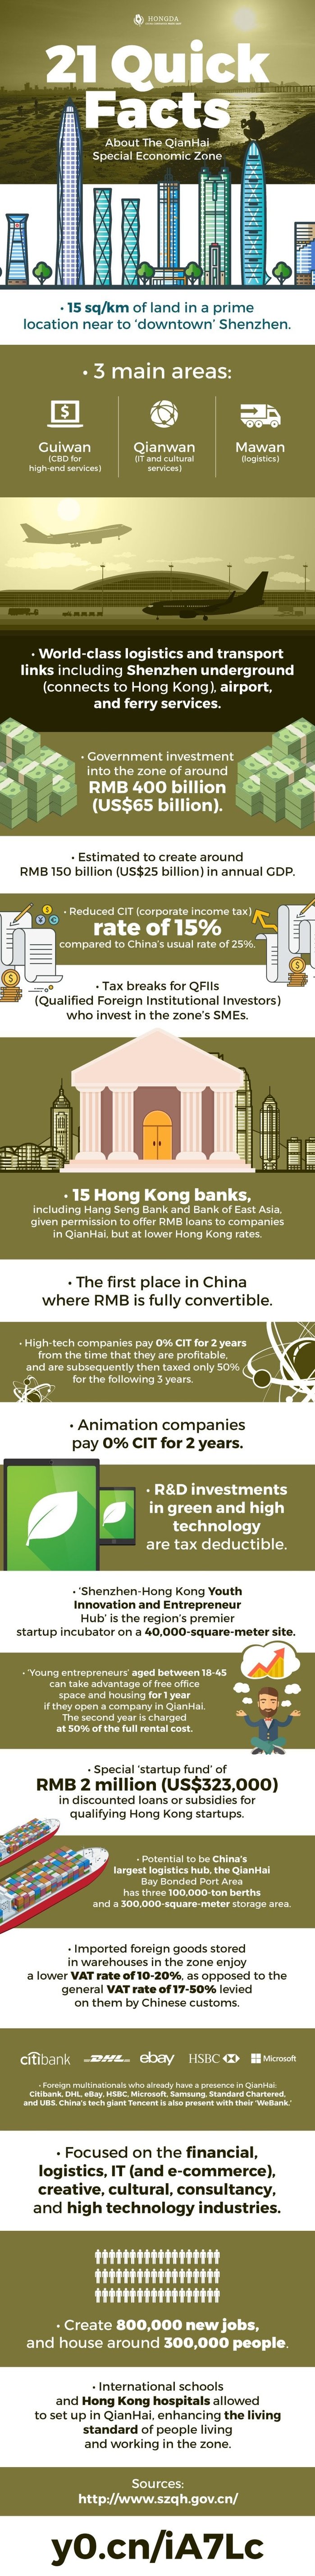 21 Quick Facts Behind the QianHai Special Economic Zone (infographic)